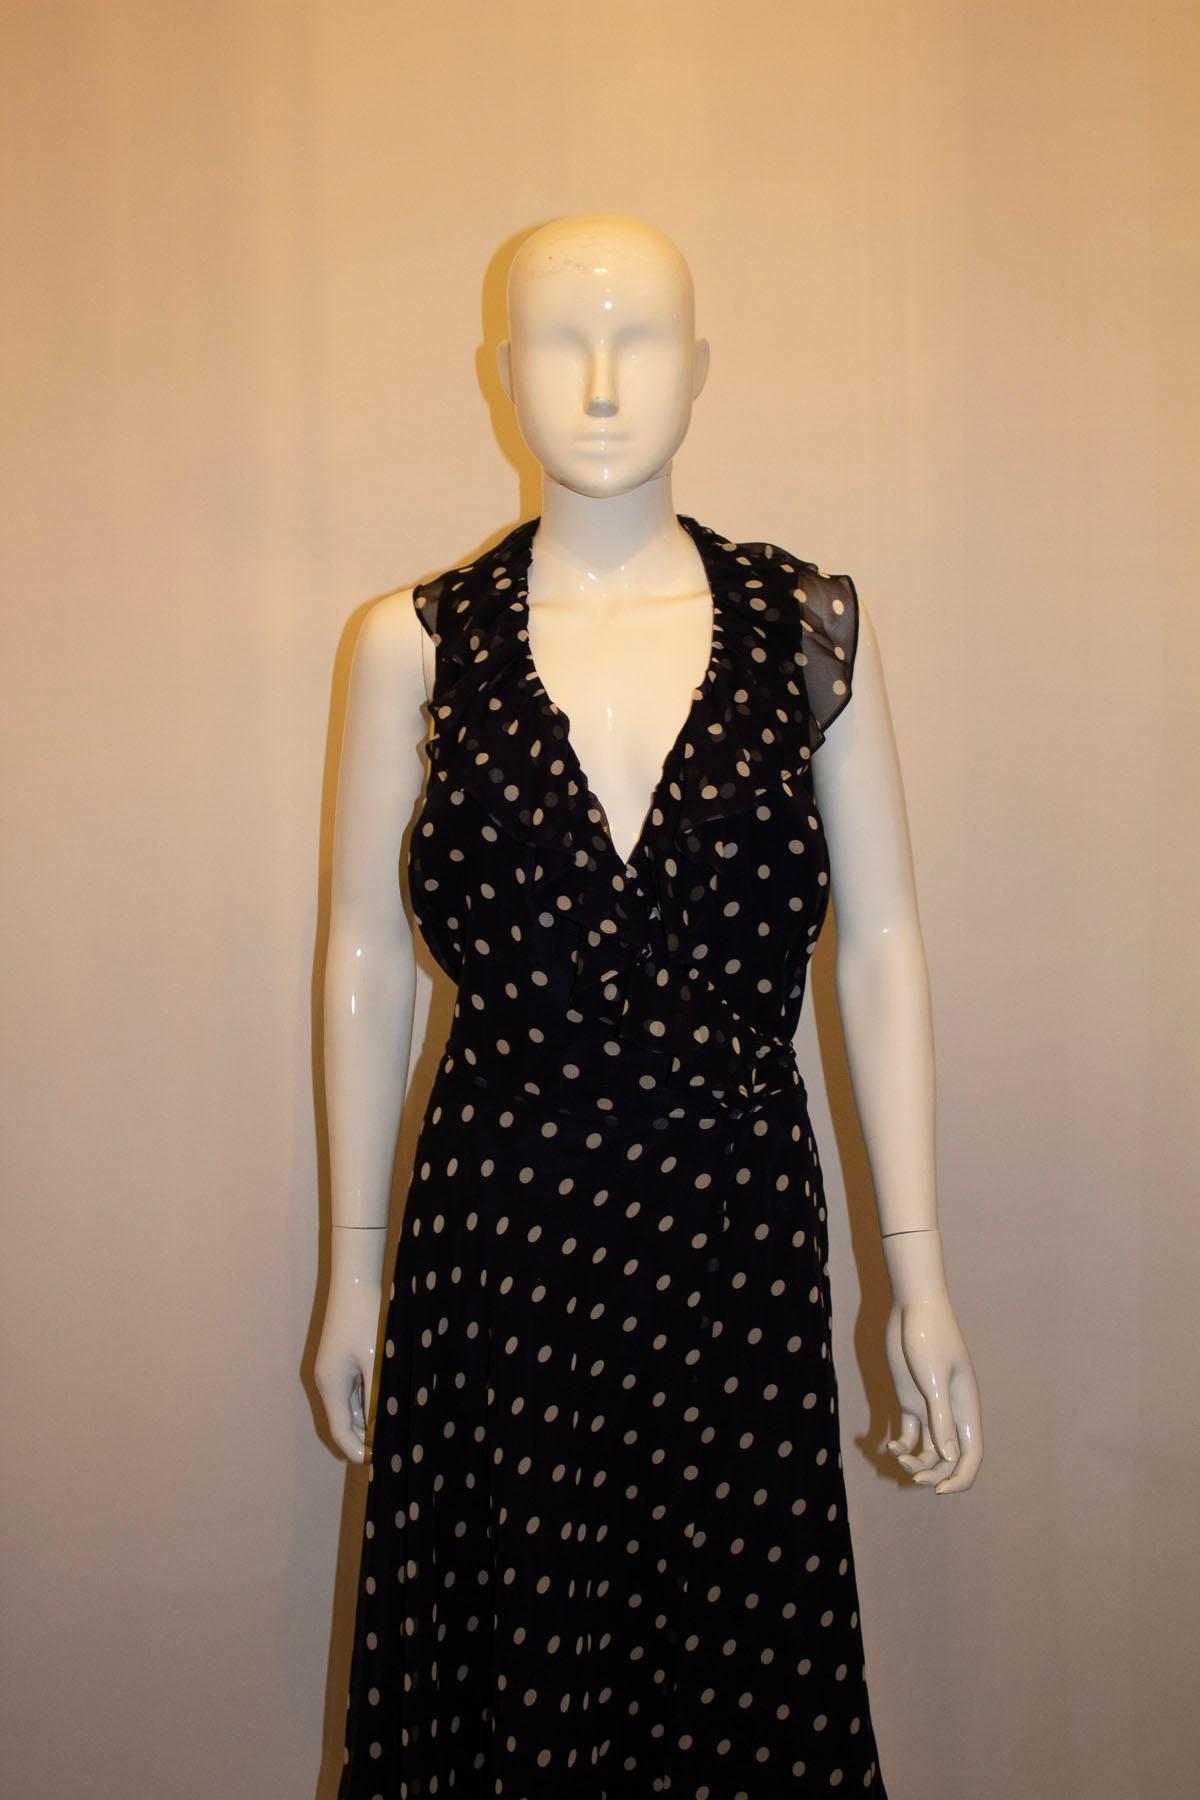 A fun and flirty silk dress by Ralph Lauren . With a blue background with white spots, the dress has a wrap over front with frill neckline and fabric belt. The dress is lined . 
Measurements: Bust up to 42'', length 40''